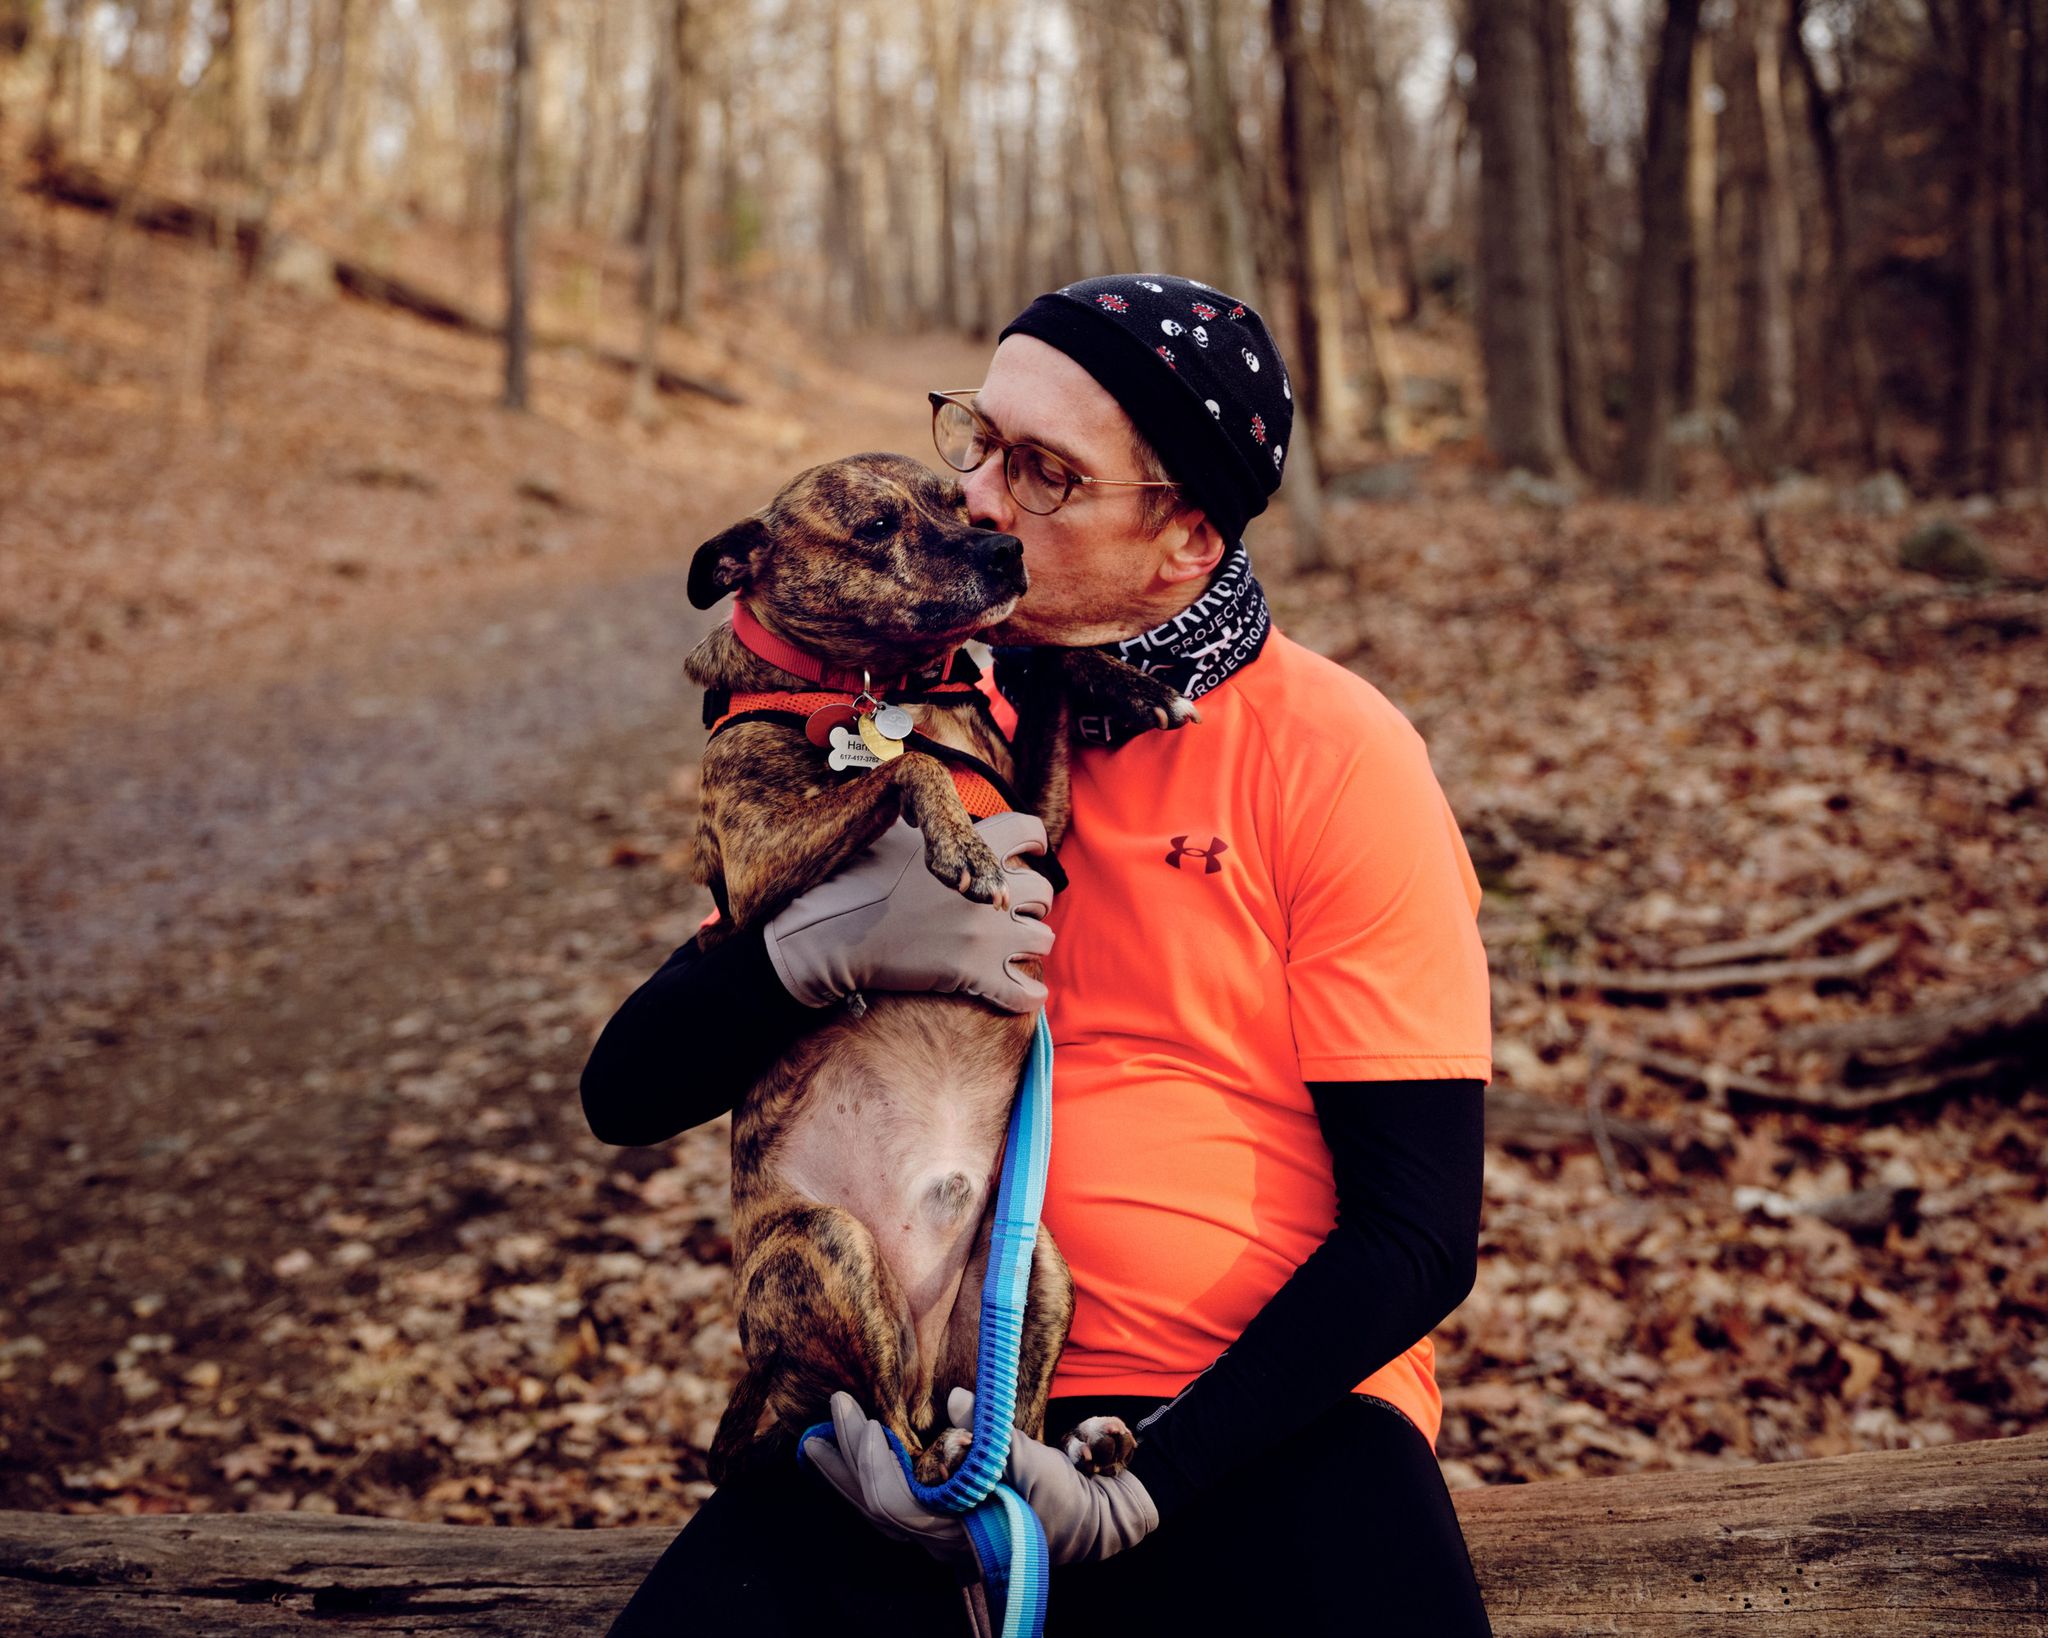 author and writer caleb daniloff and his dog, hank at the middlesex fells reservation outside of boston ma